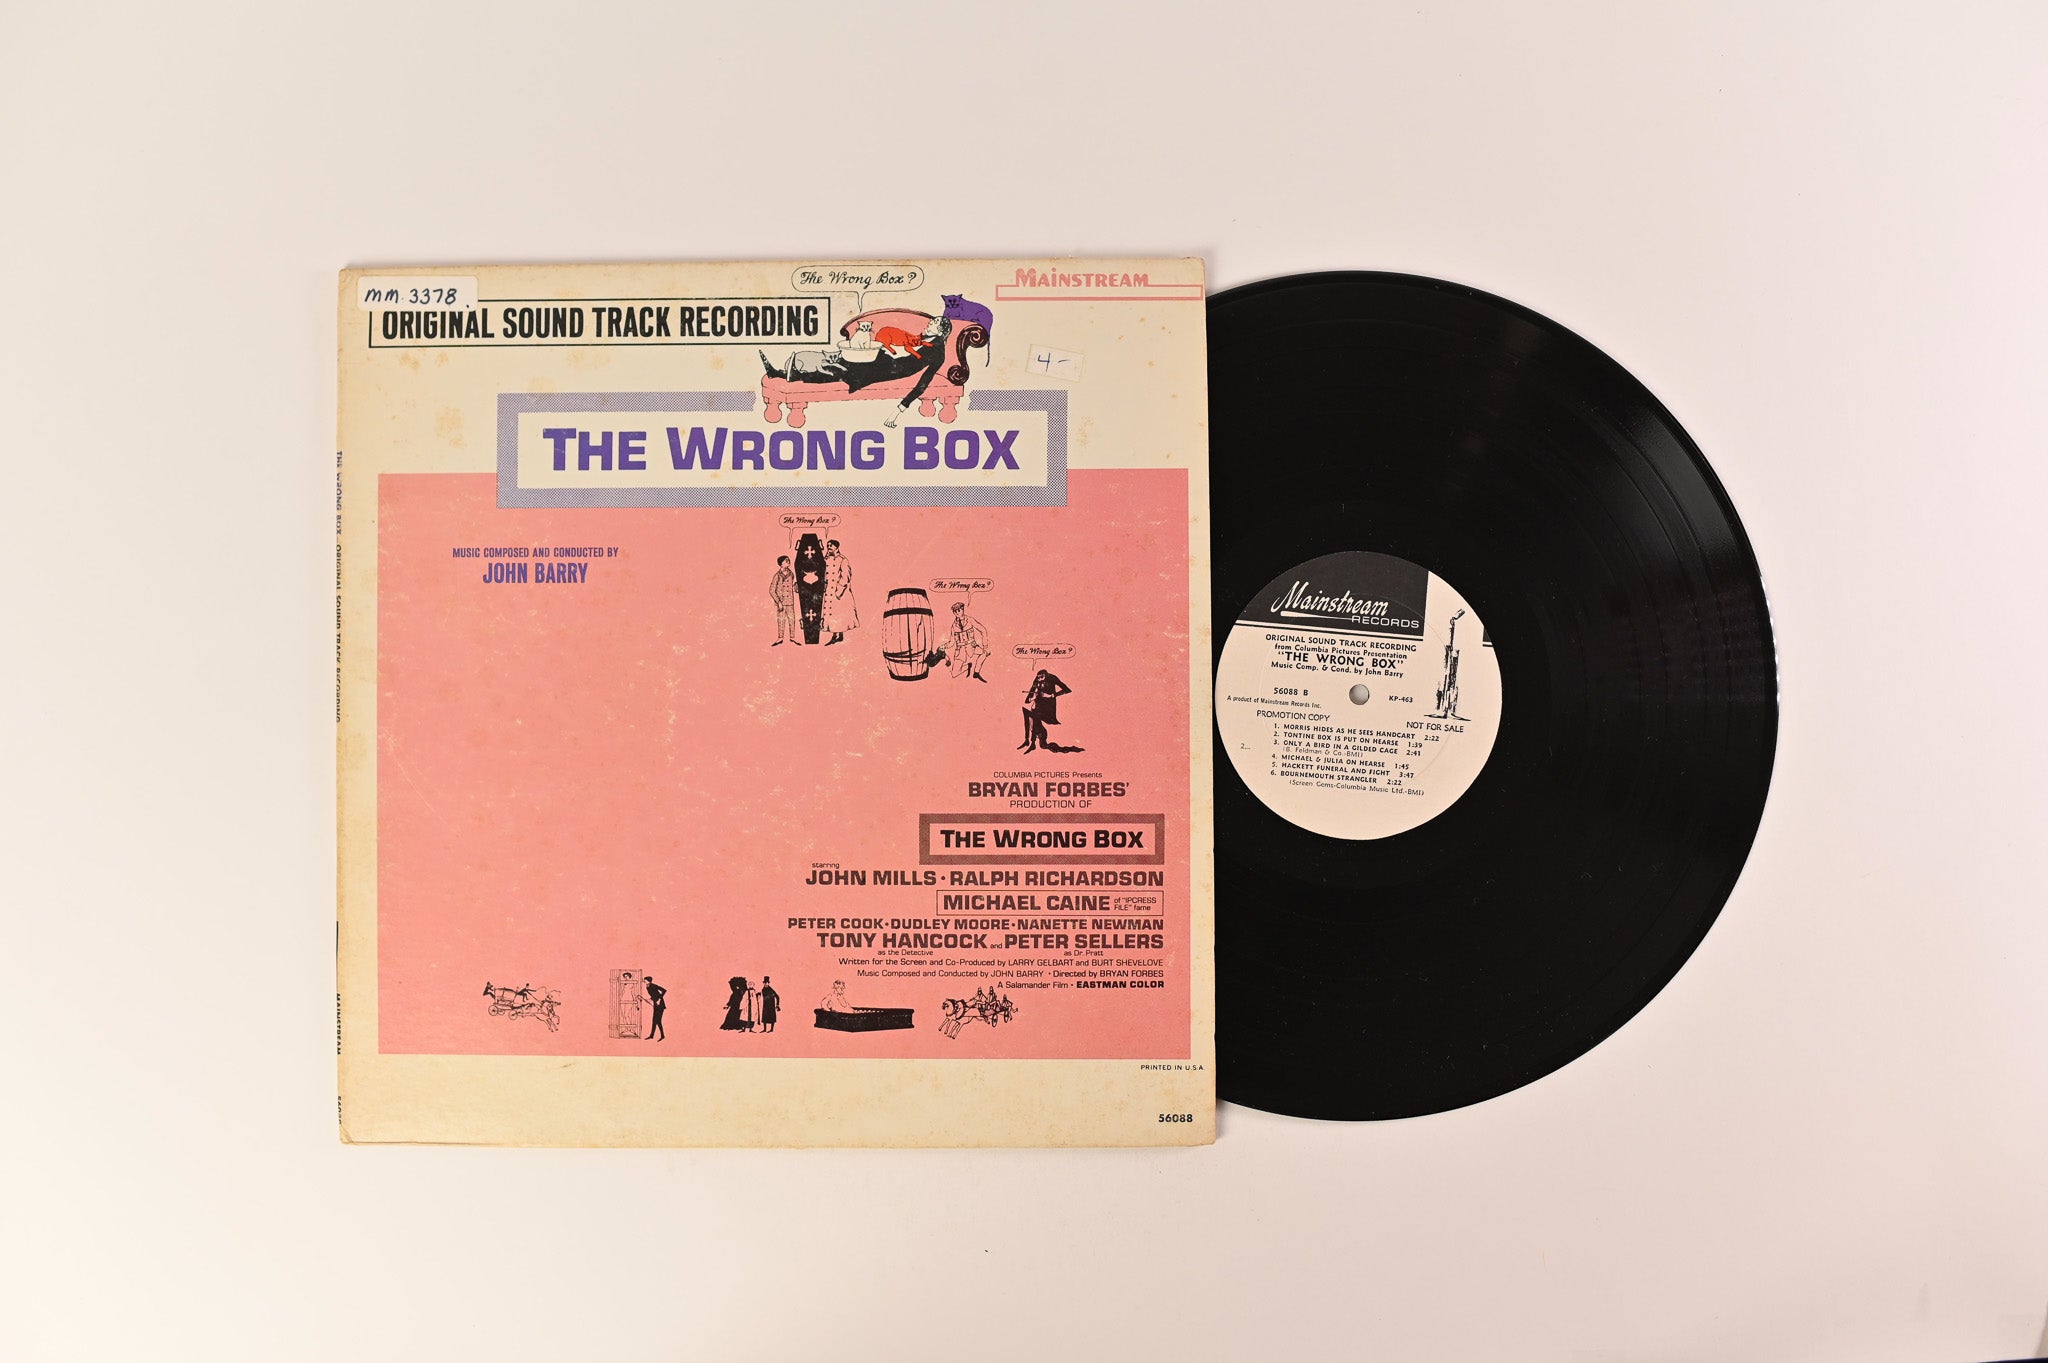 John Barry - The Wrong Box on Mainstream Records